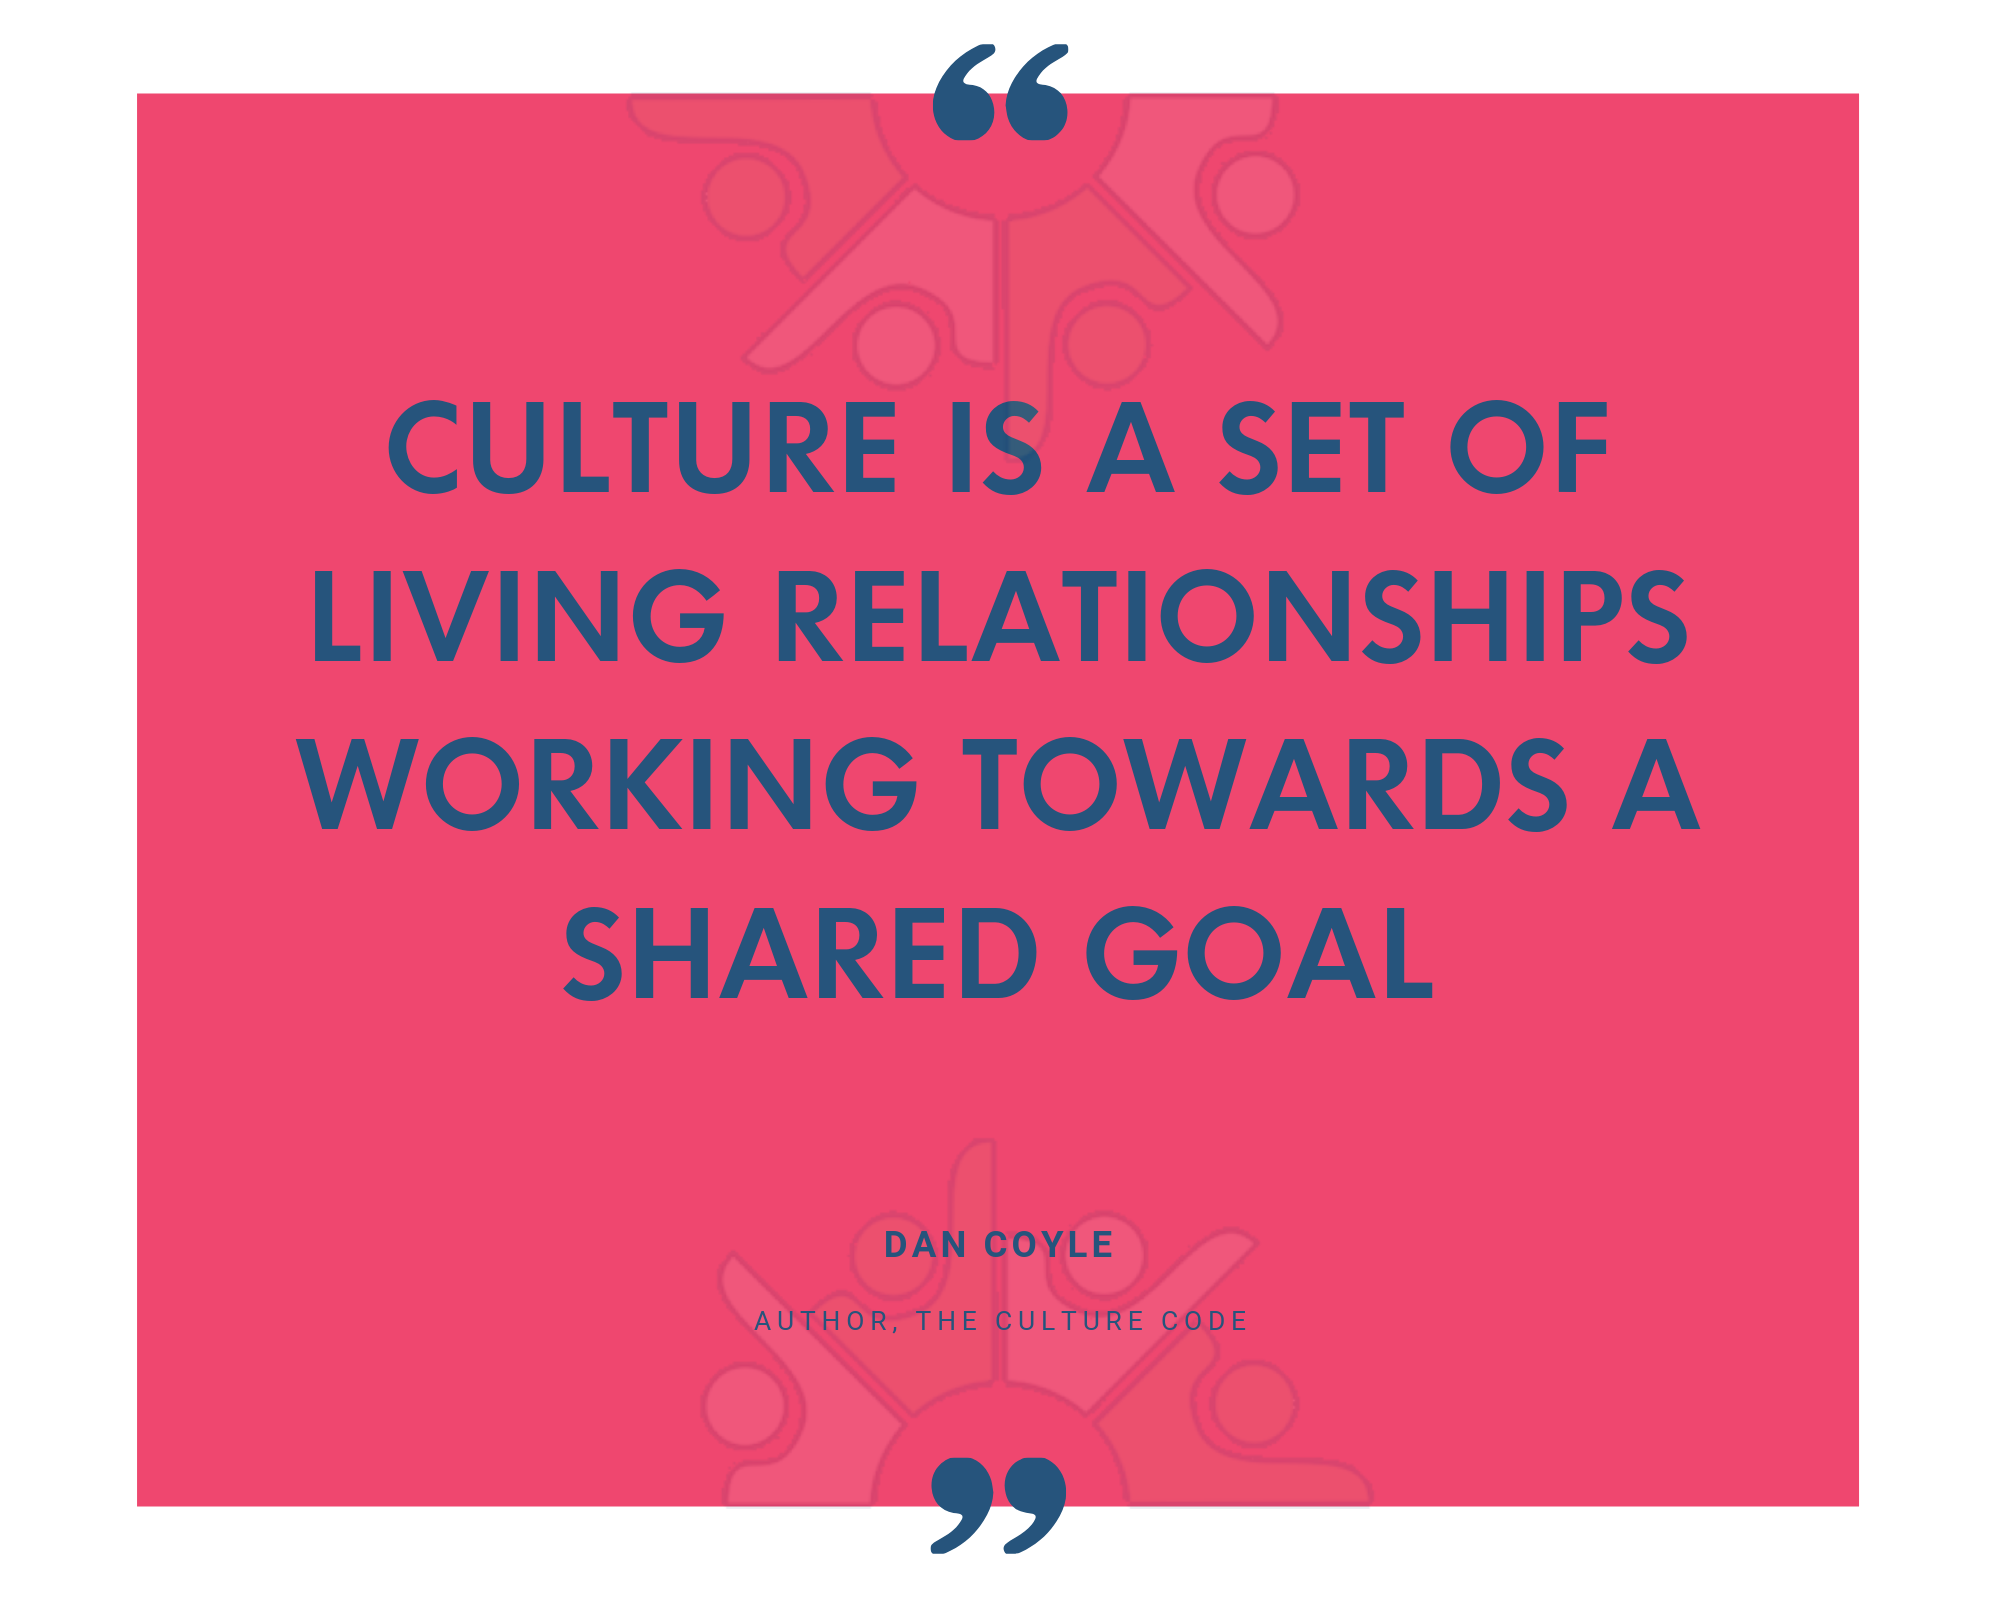 Culture is a set of living relationships working towards a shared goal